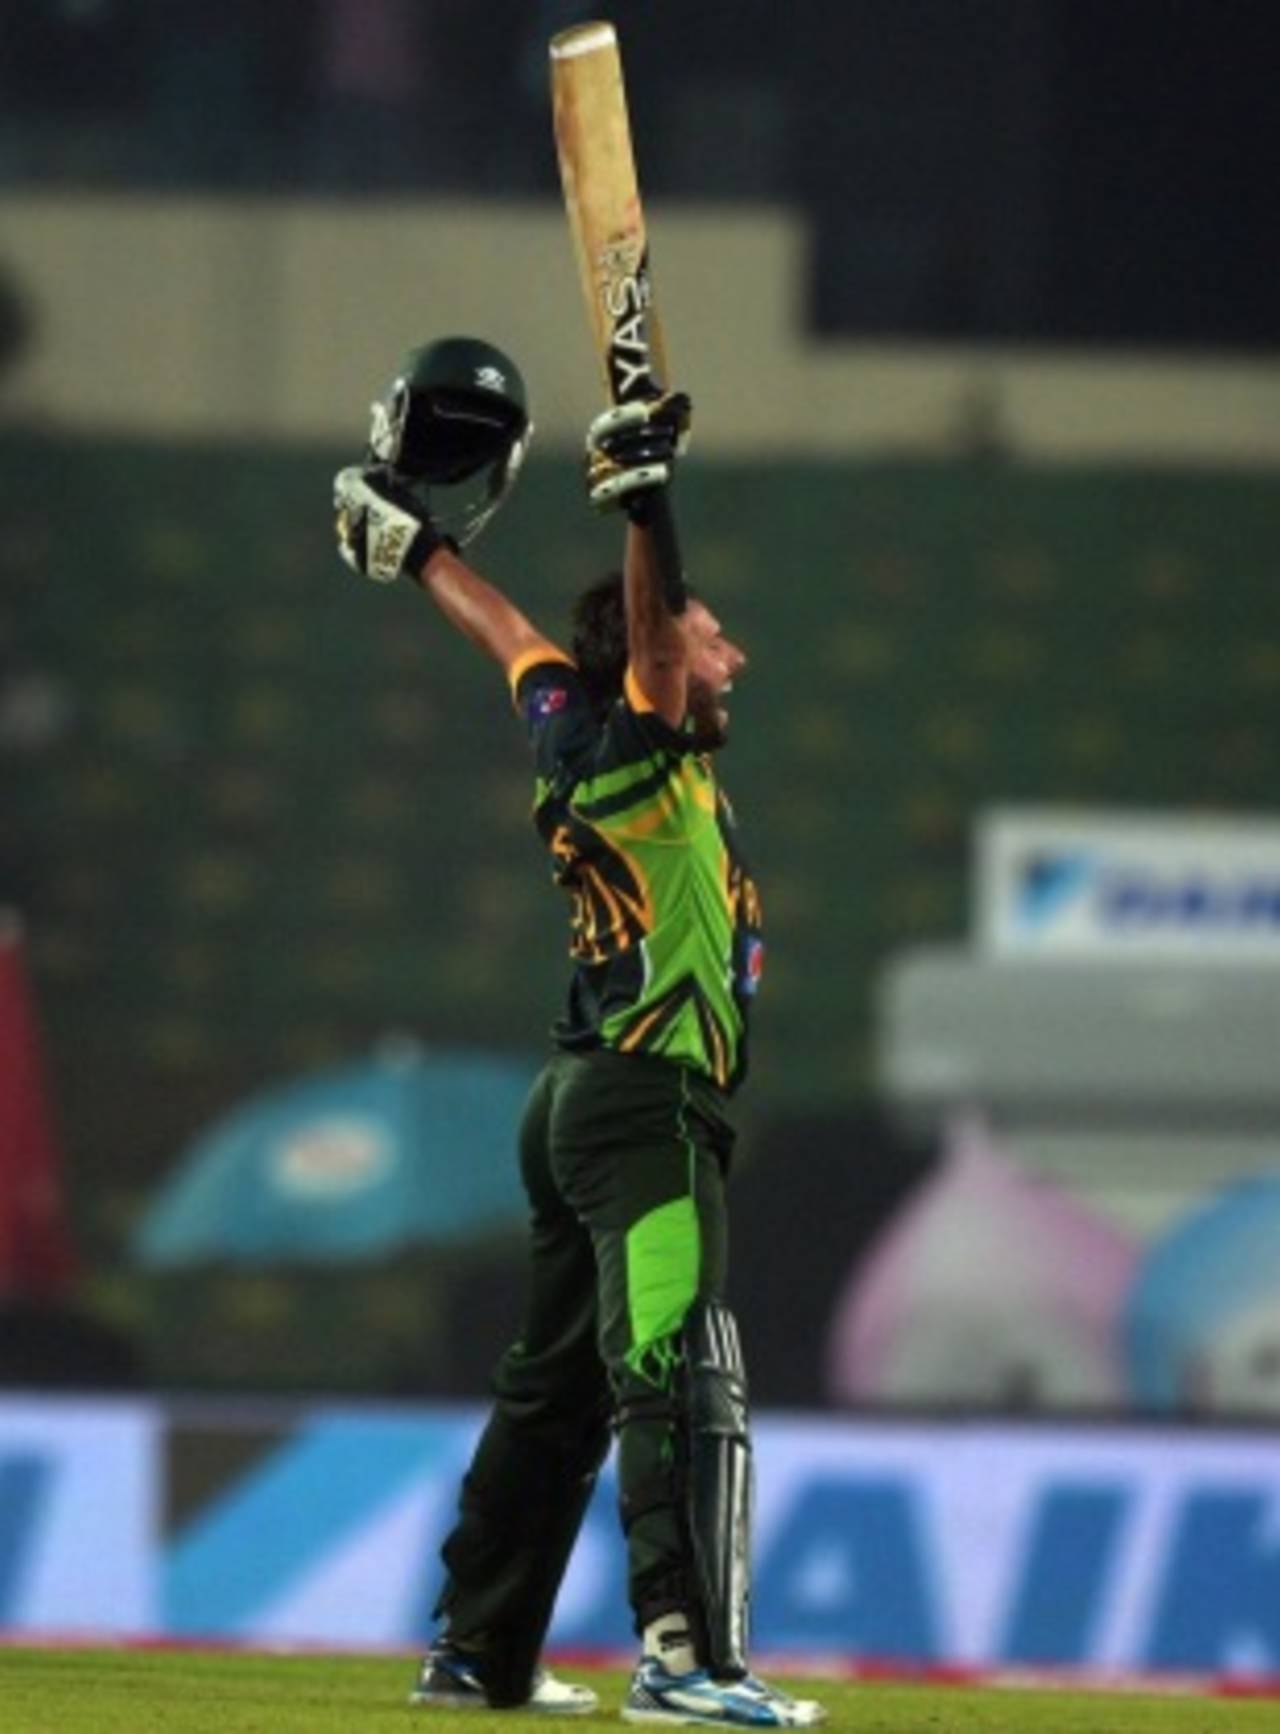 Shahid Afridi roars after hitting the winning six, India v Pakistan, Asia Cup, Mirpur, March 2, 2014